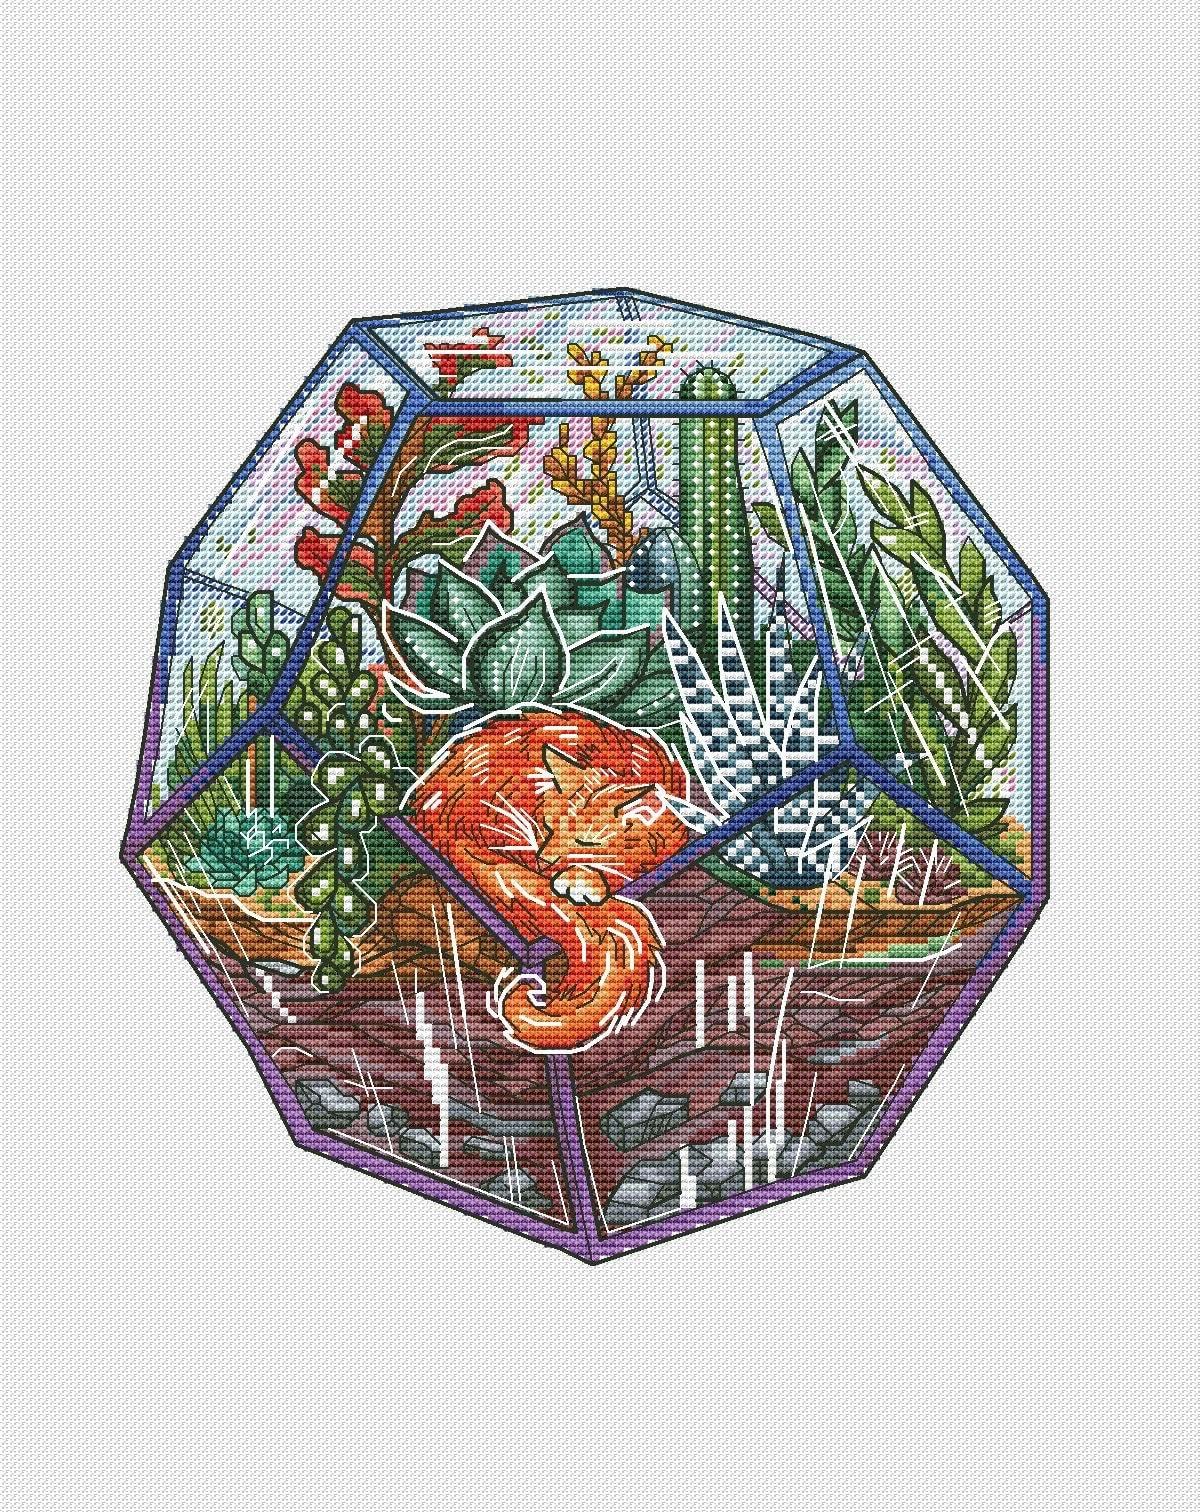 Primary image for Florarium cross stitch red cat pattern pdf - round embroidery glass garden 